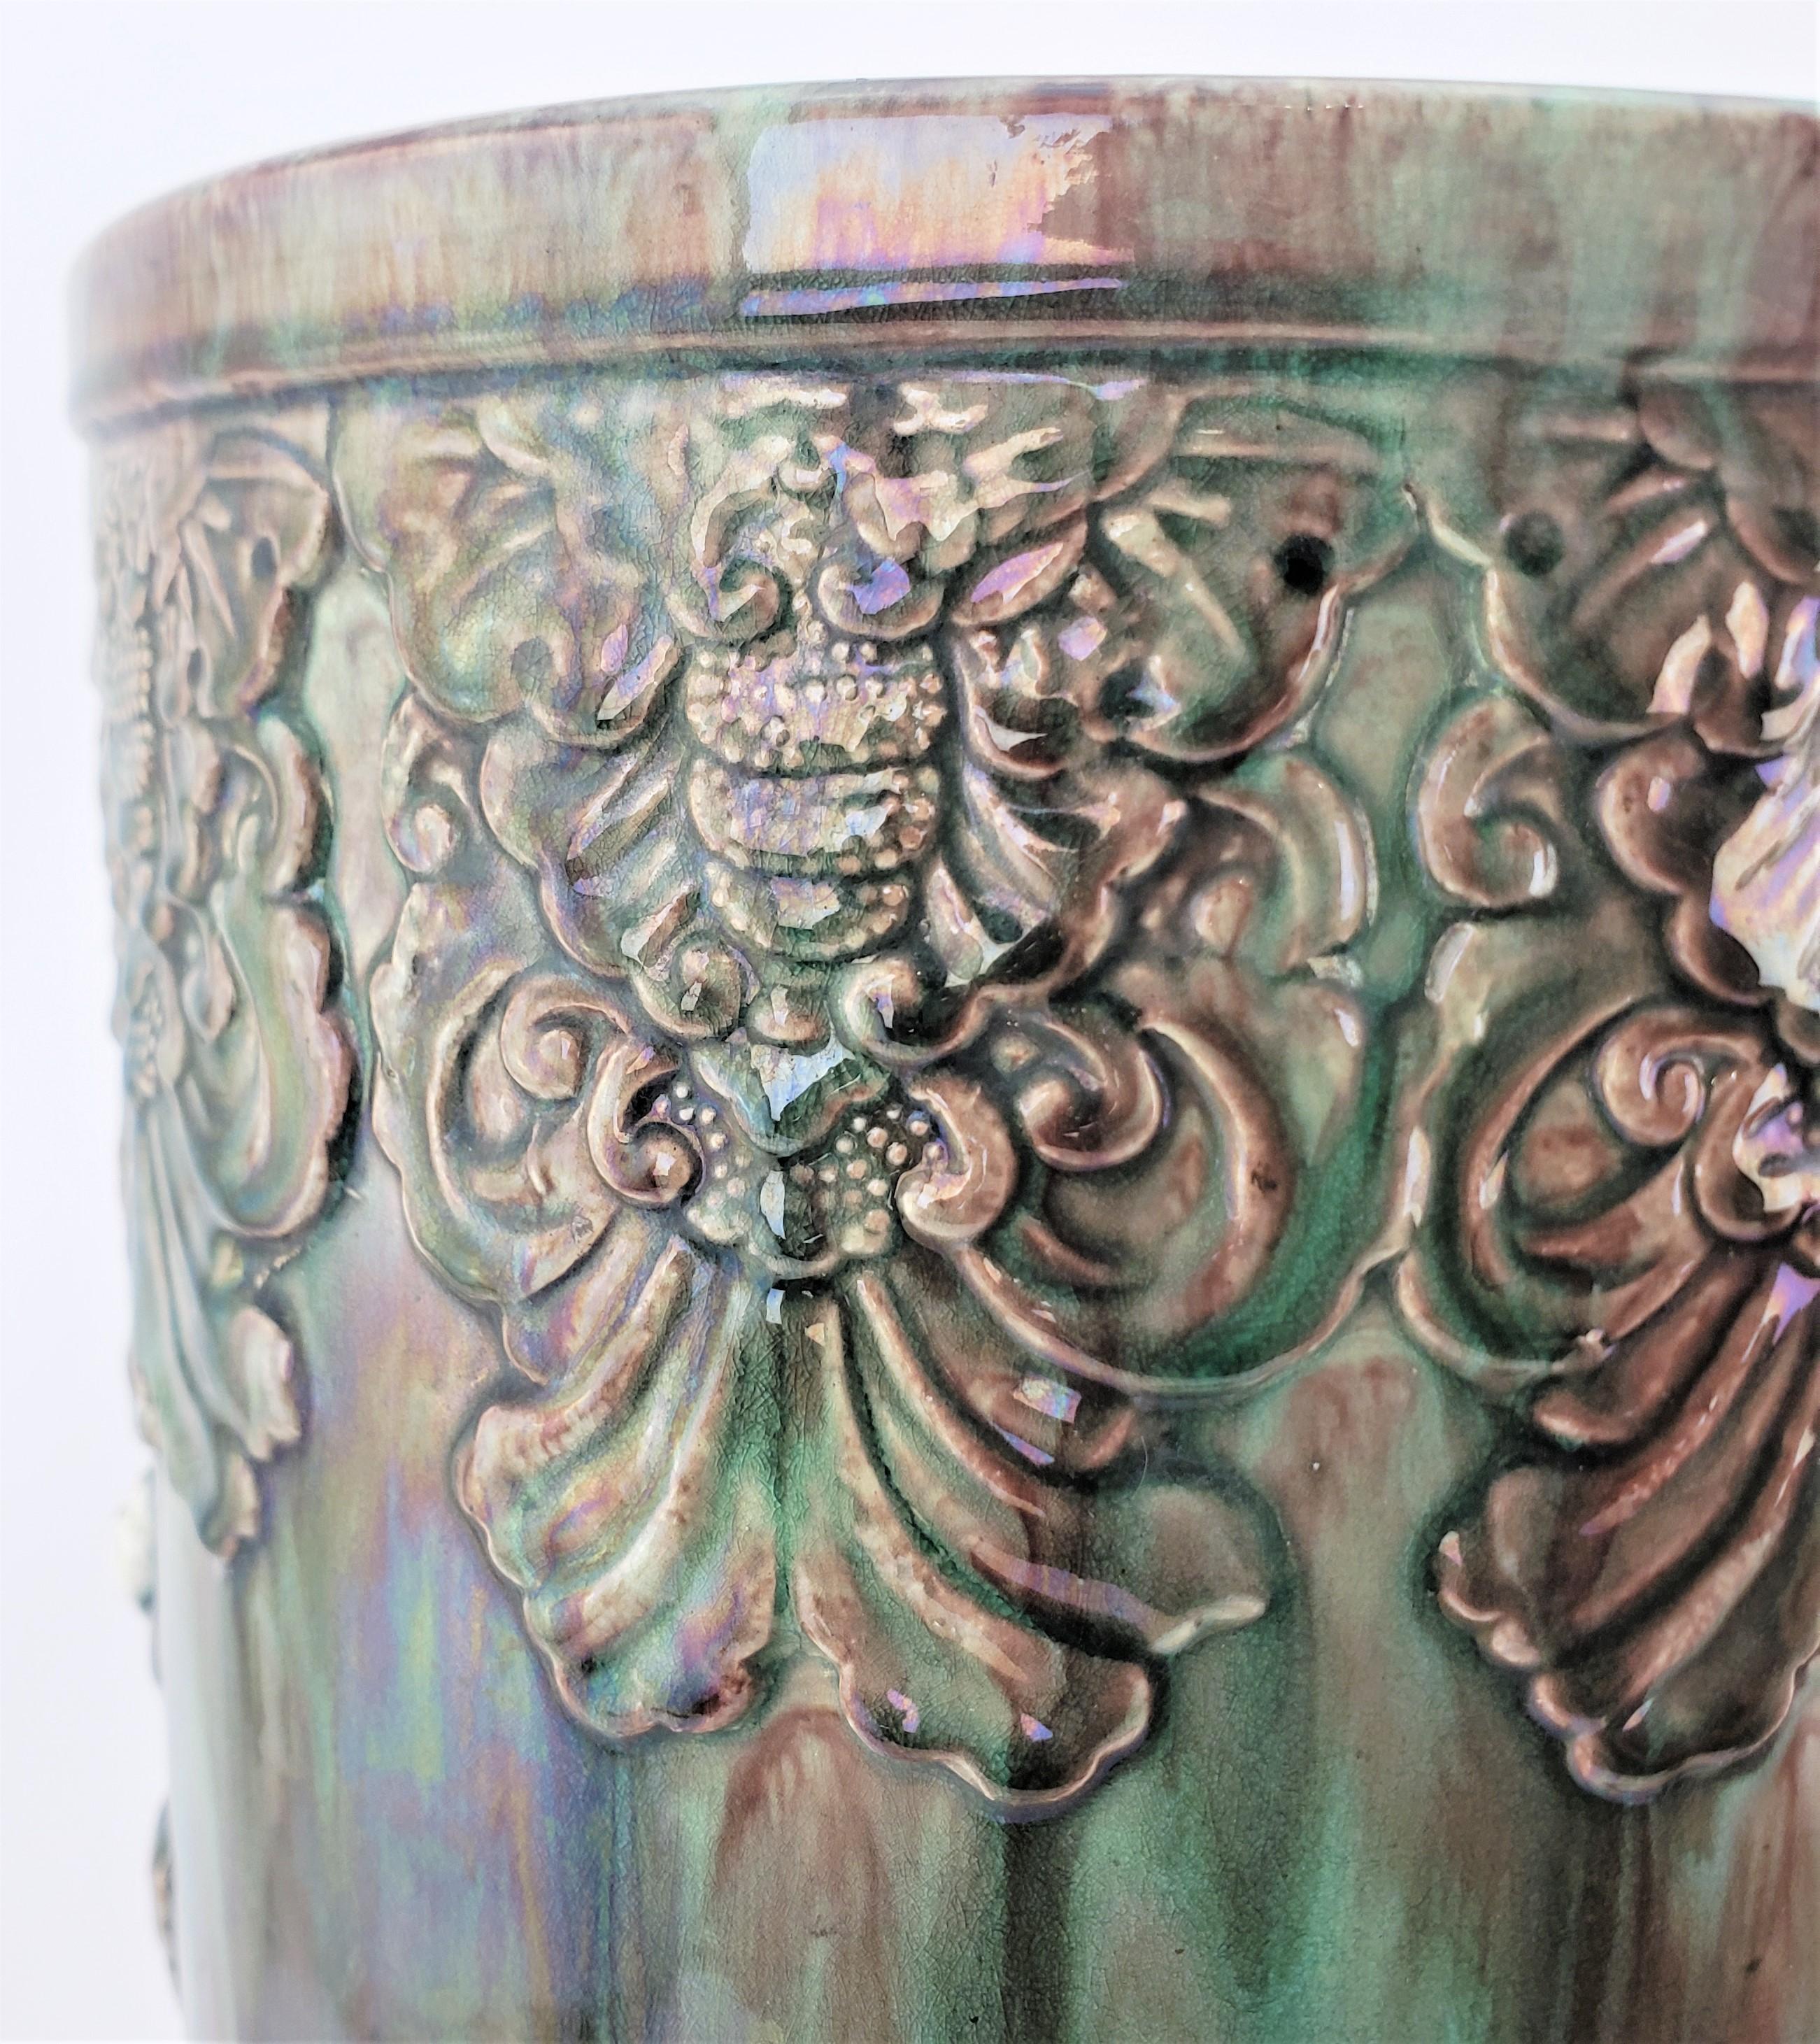 Antique Chinese Lead Drip Glazed Majolica Umbrella Stand with Floral Decoration In Good Condition For Sale In Hamilton, Ontario